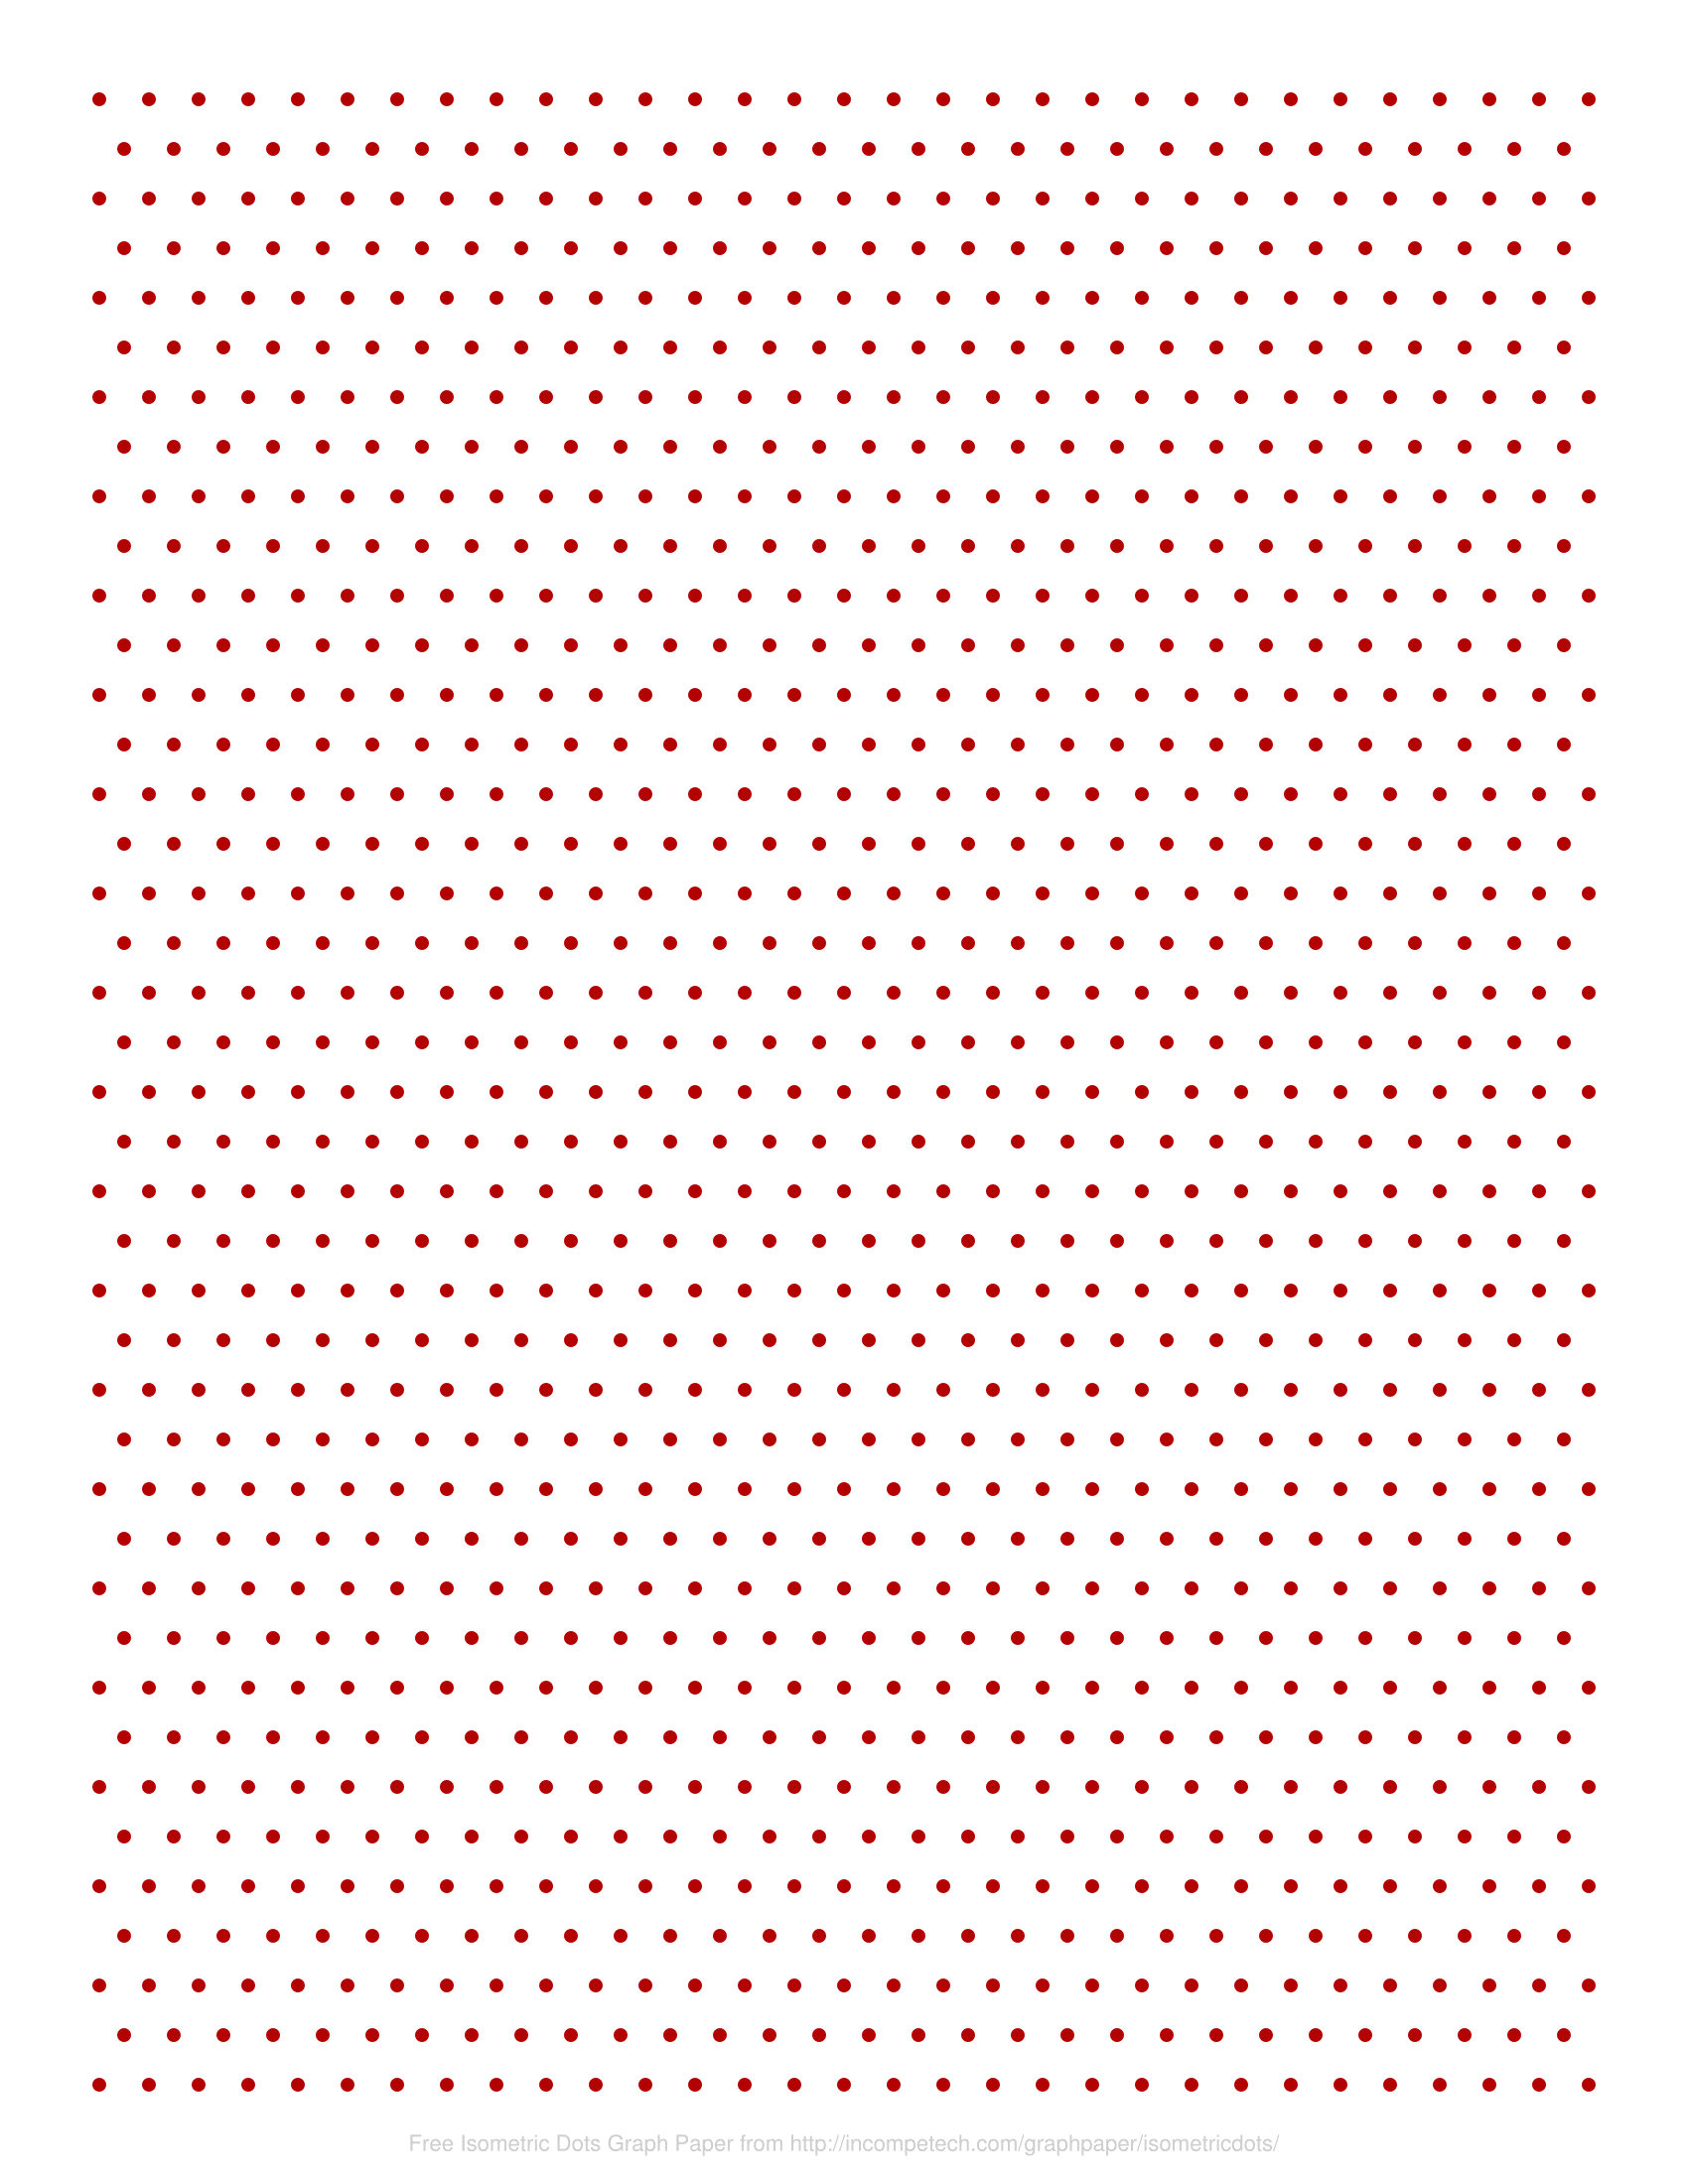 Free Online Graph Paper / Isometric Dots